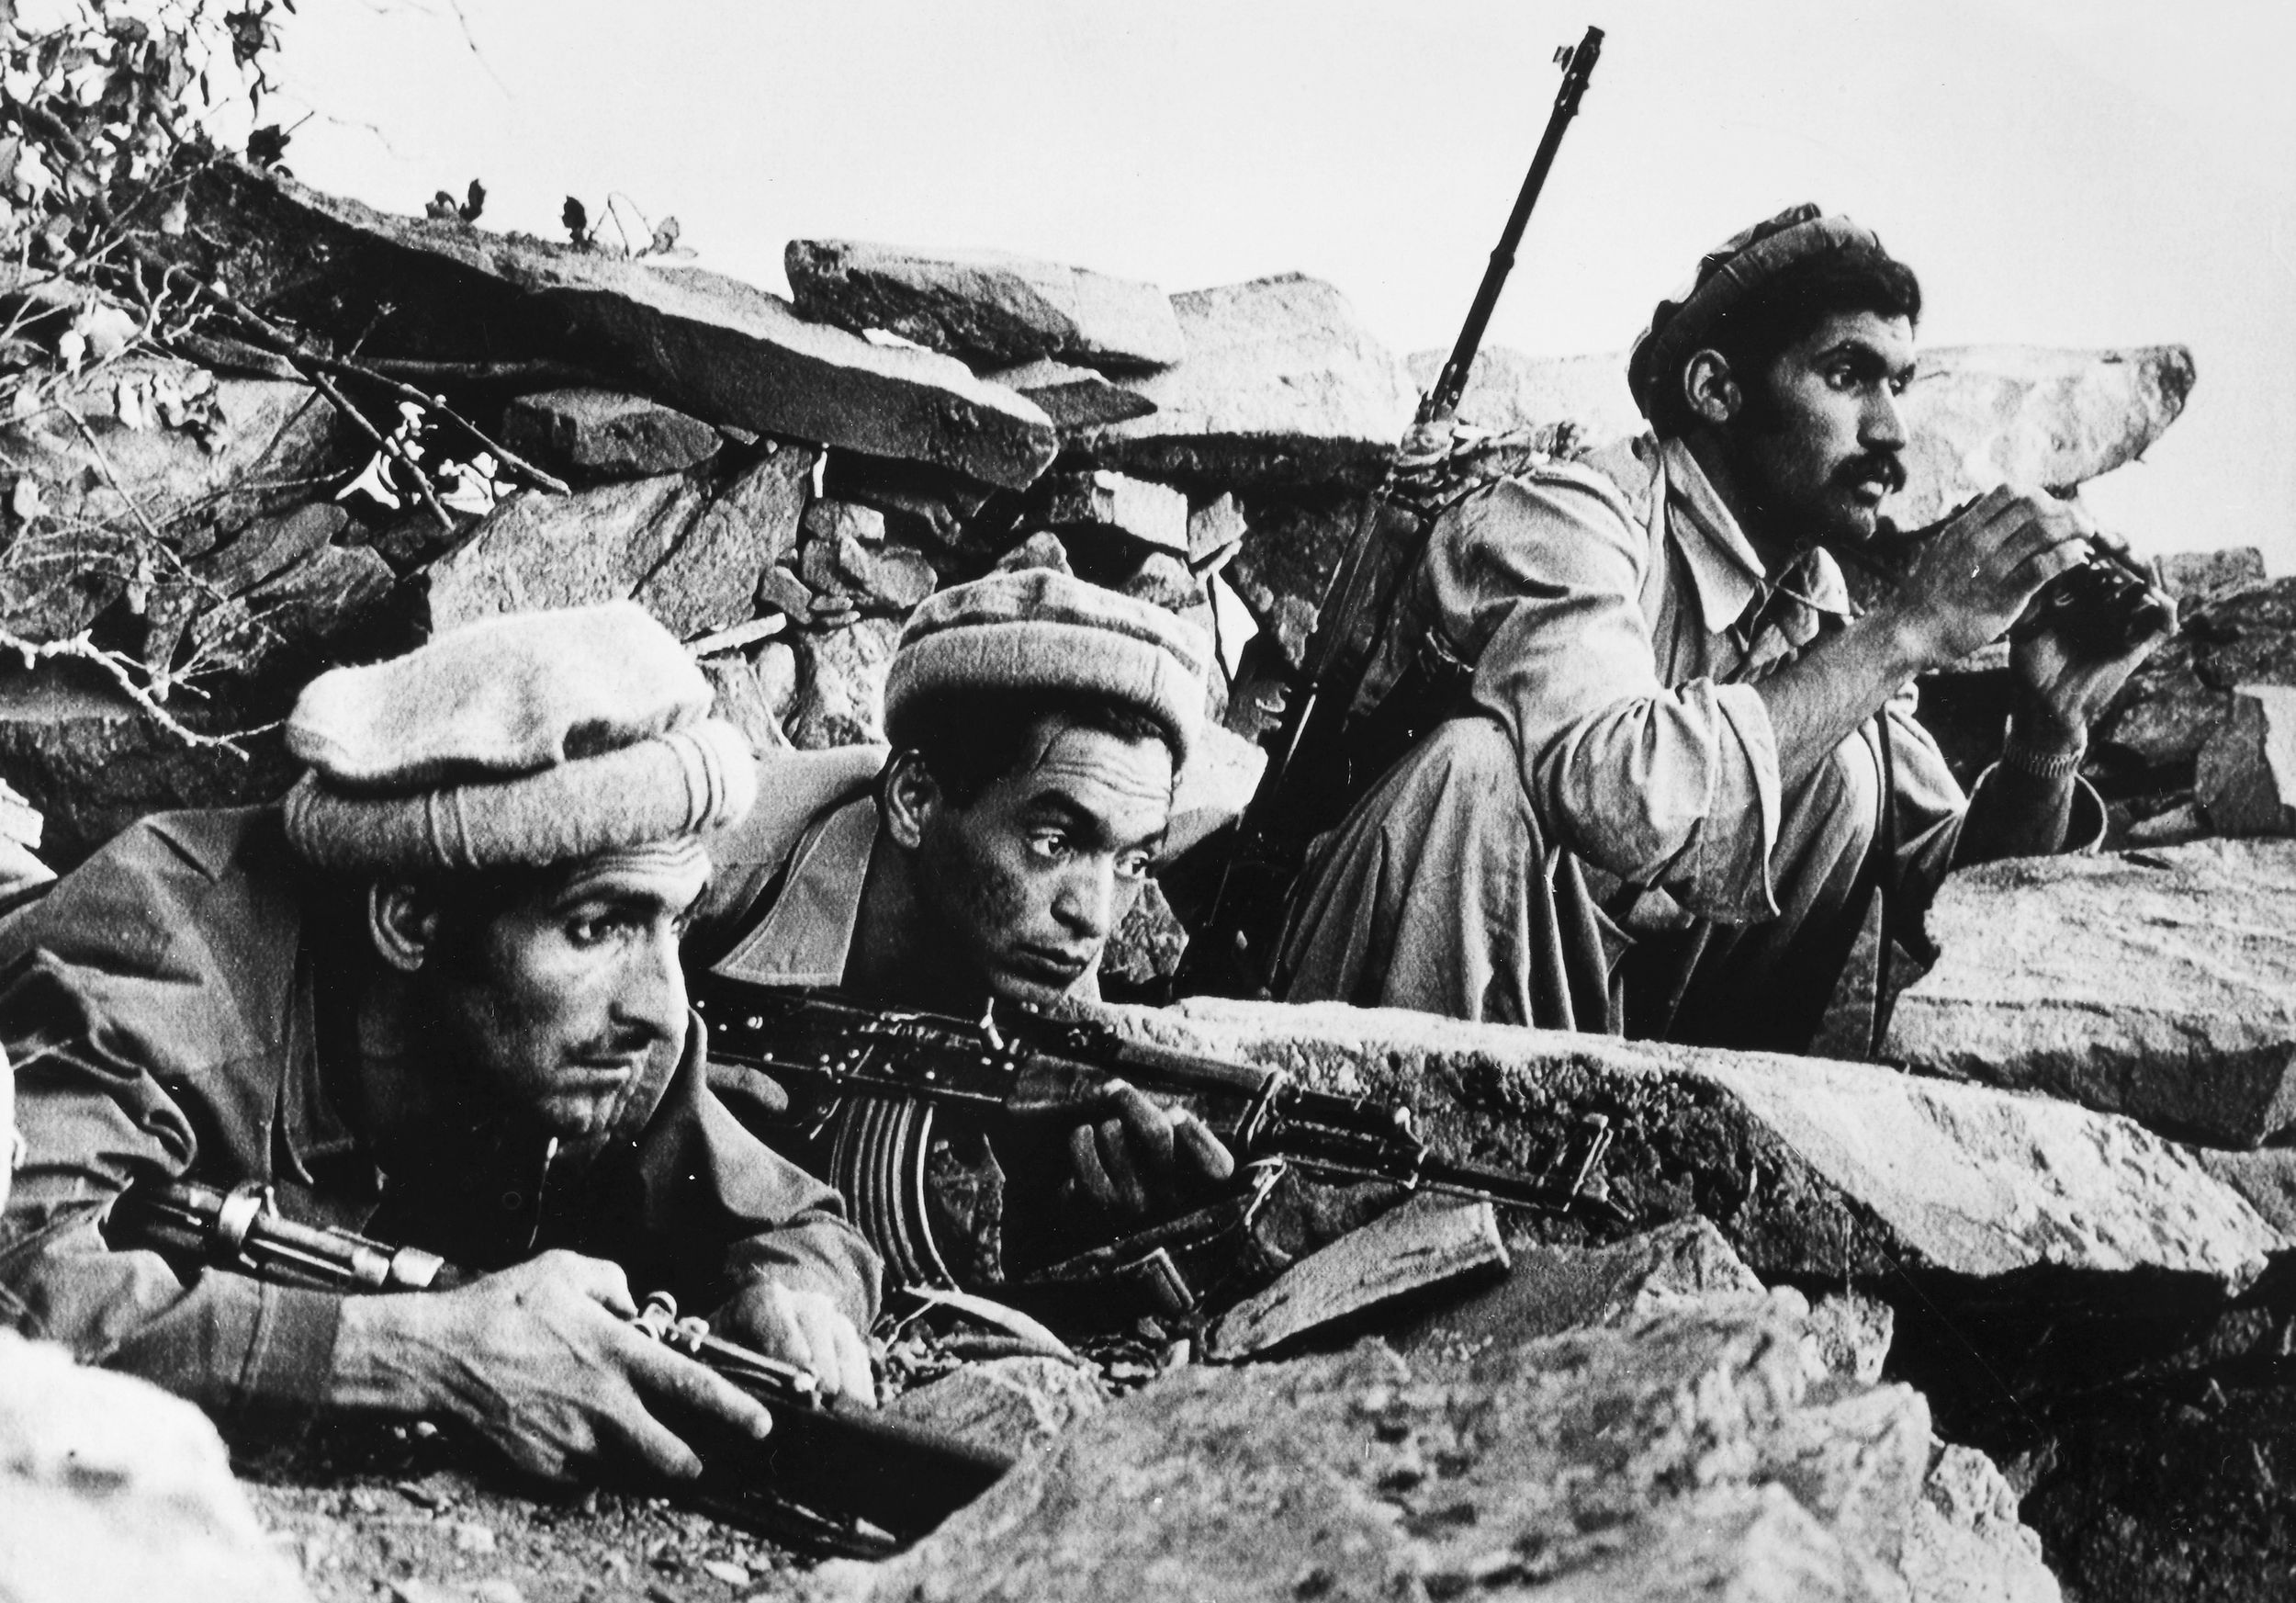 Sharp-eyed Muslim snipers perch on a hilltop overlooking a government encampment at Barikot in Kunar Province, September 1979.